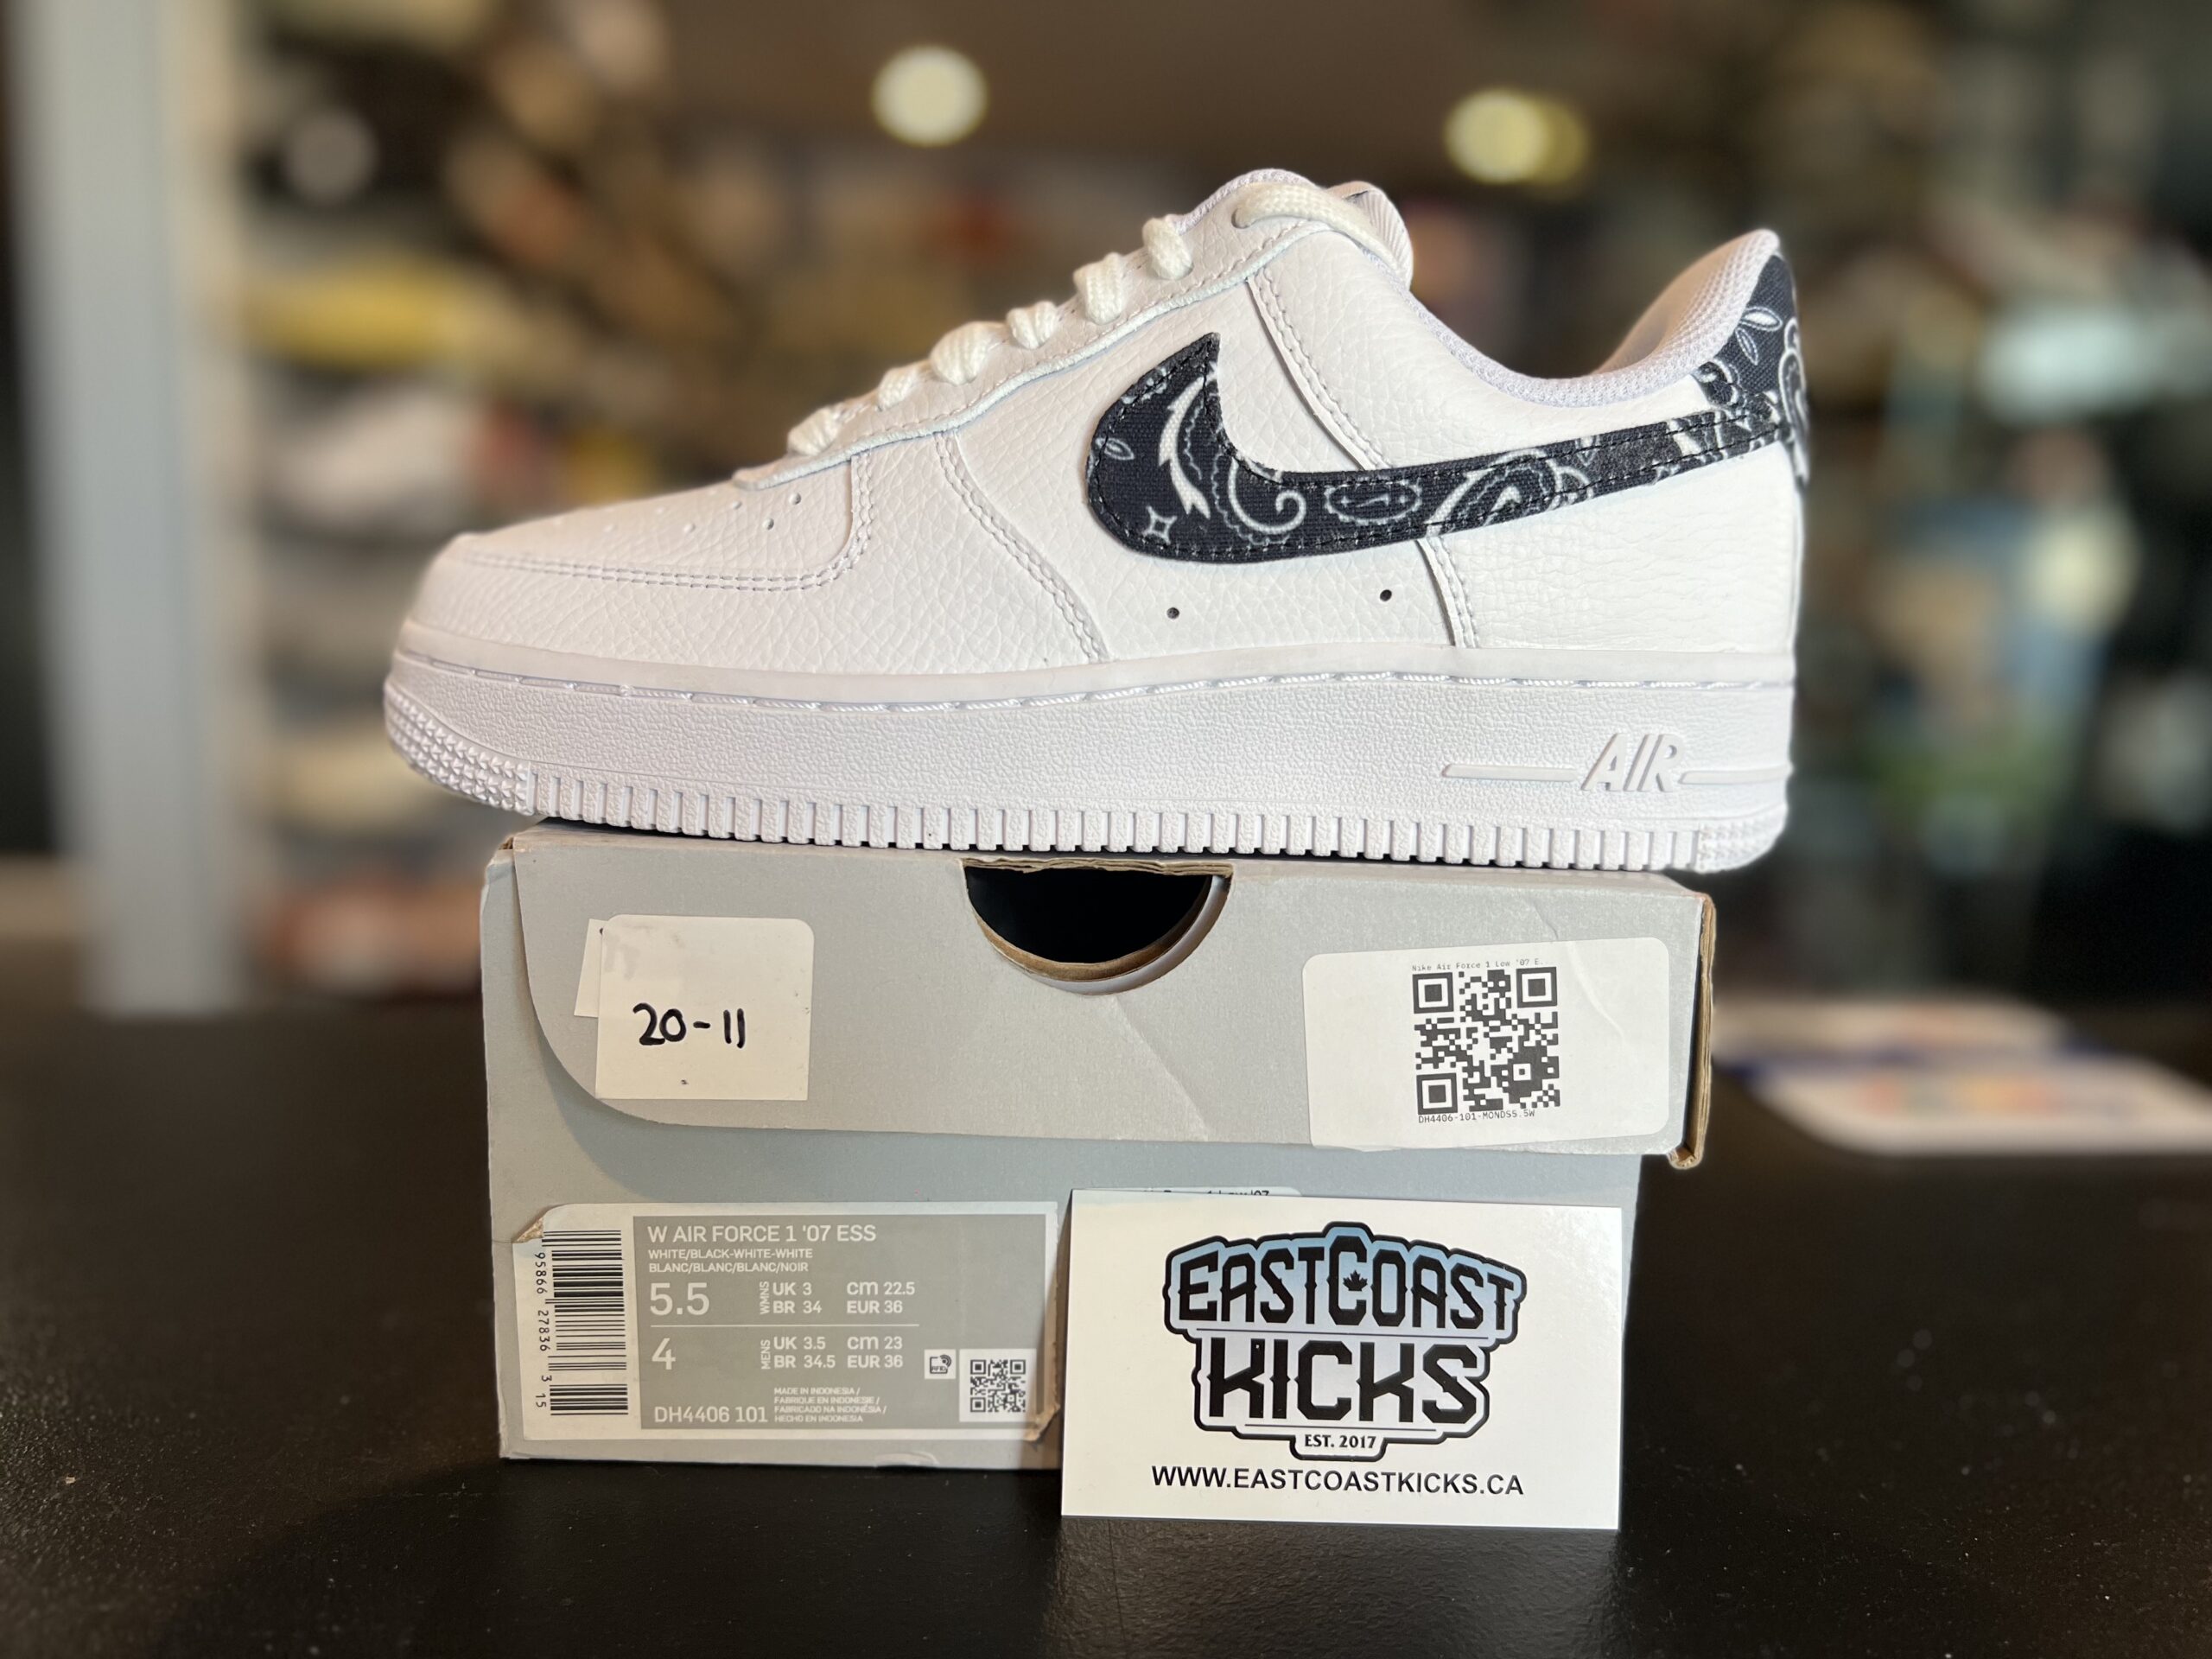 Nike Air Force 1 Low ’07 Essential White Black Paisley Size 5.5w/4Y